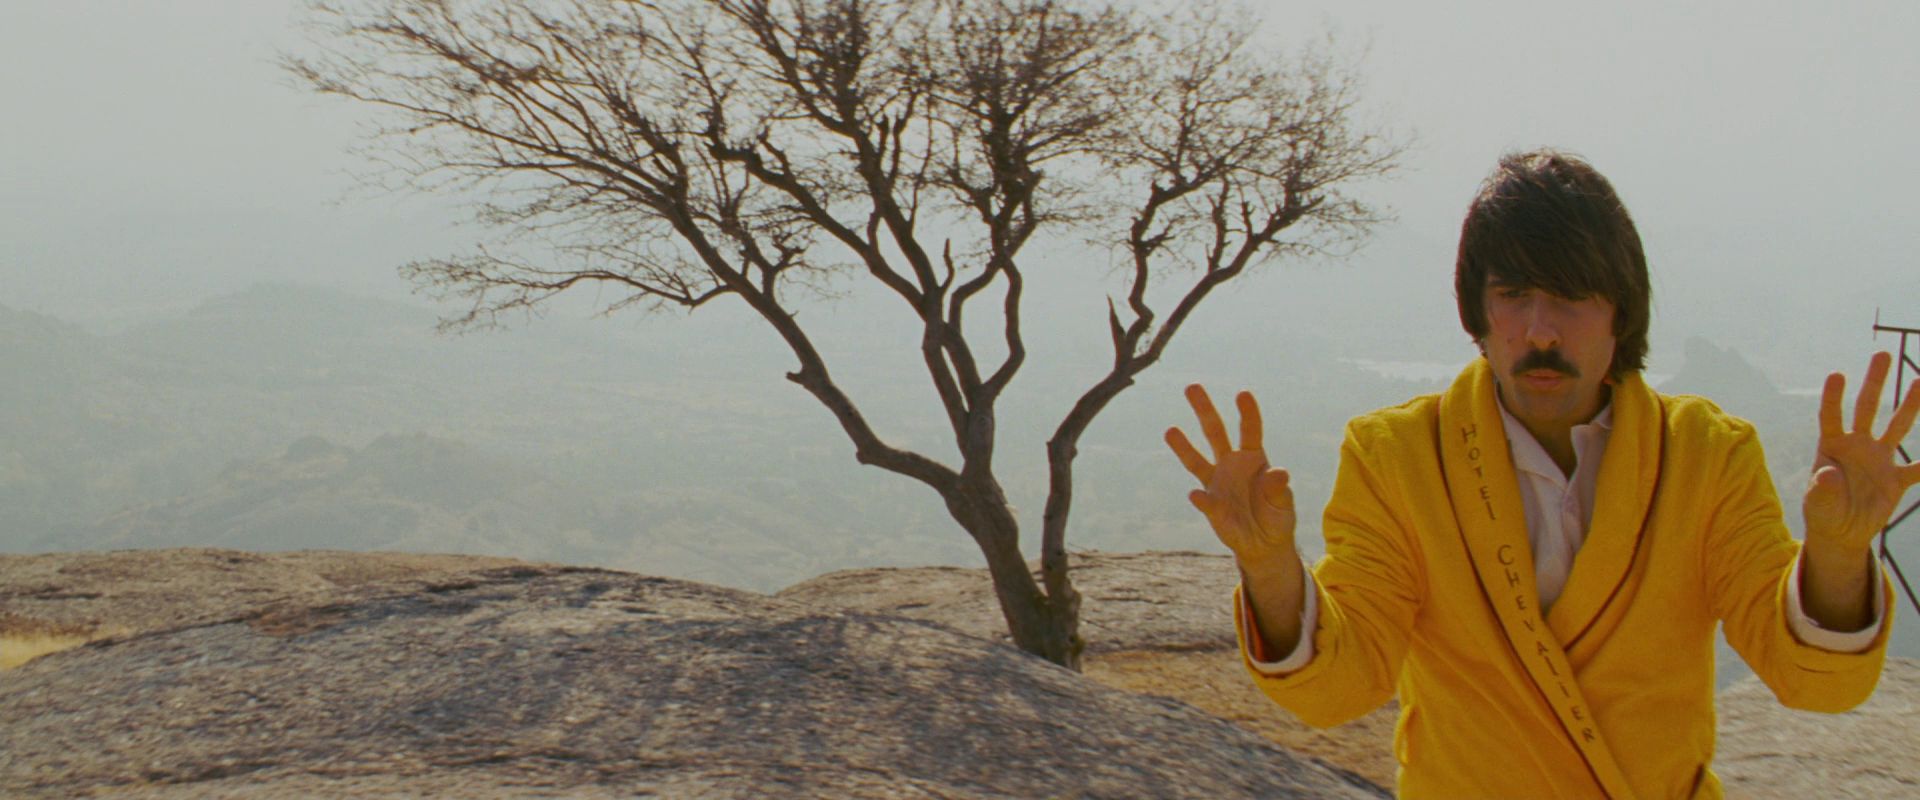 The Darjeeling Limited (2007)  Wes anderson films, Wes anderson